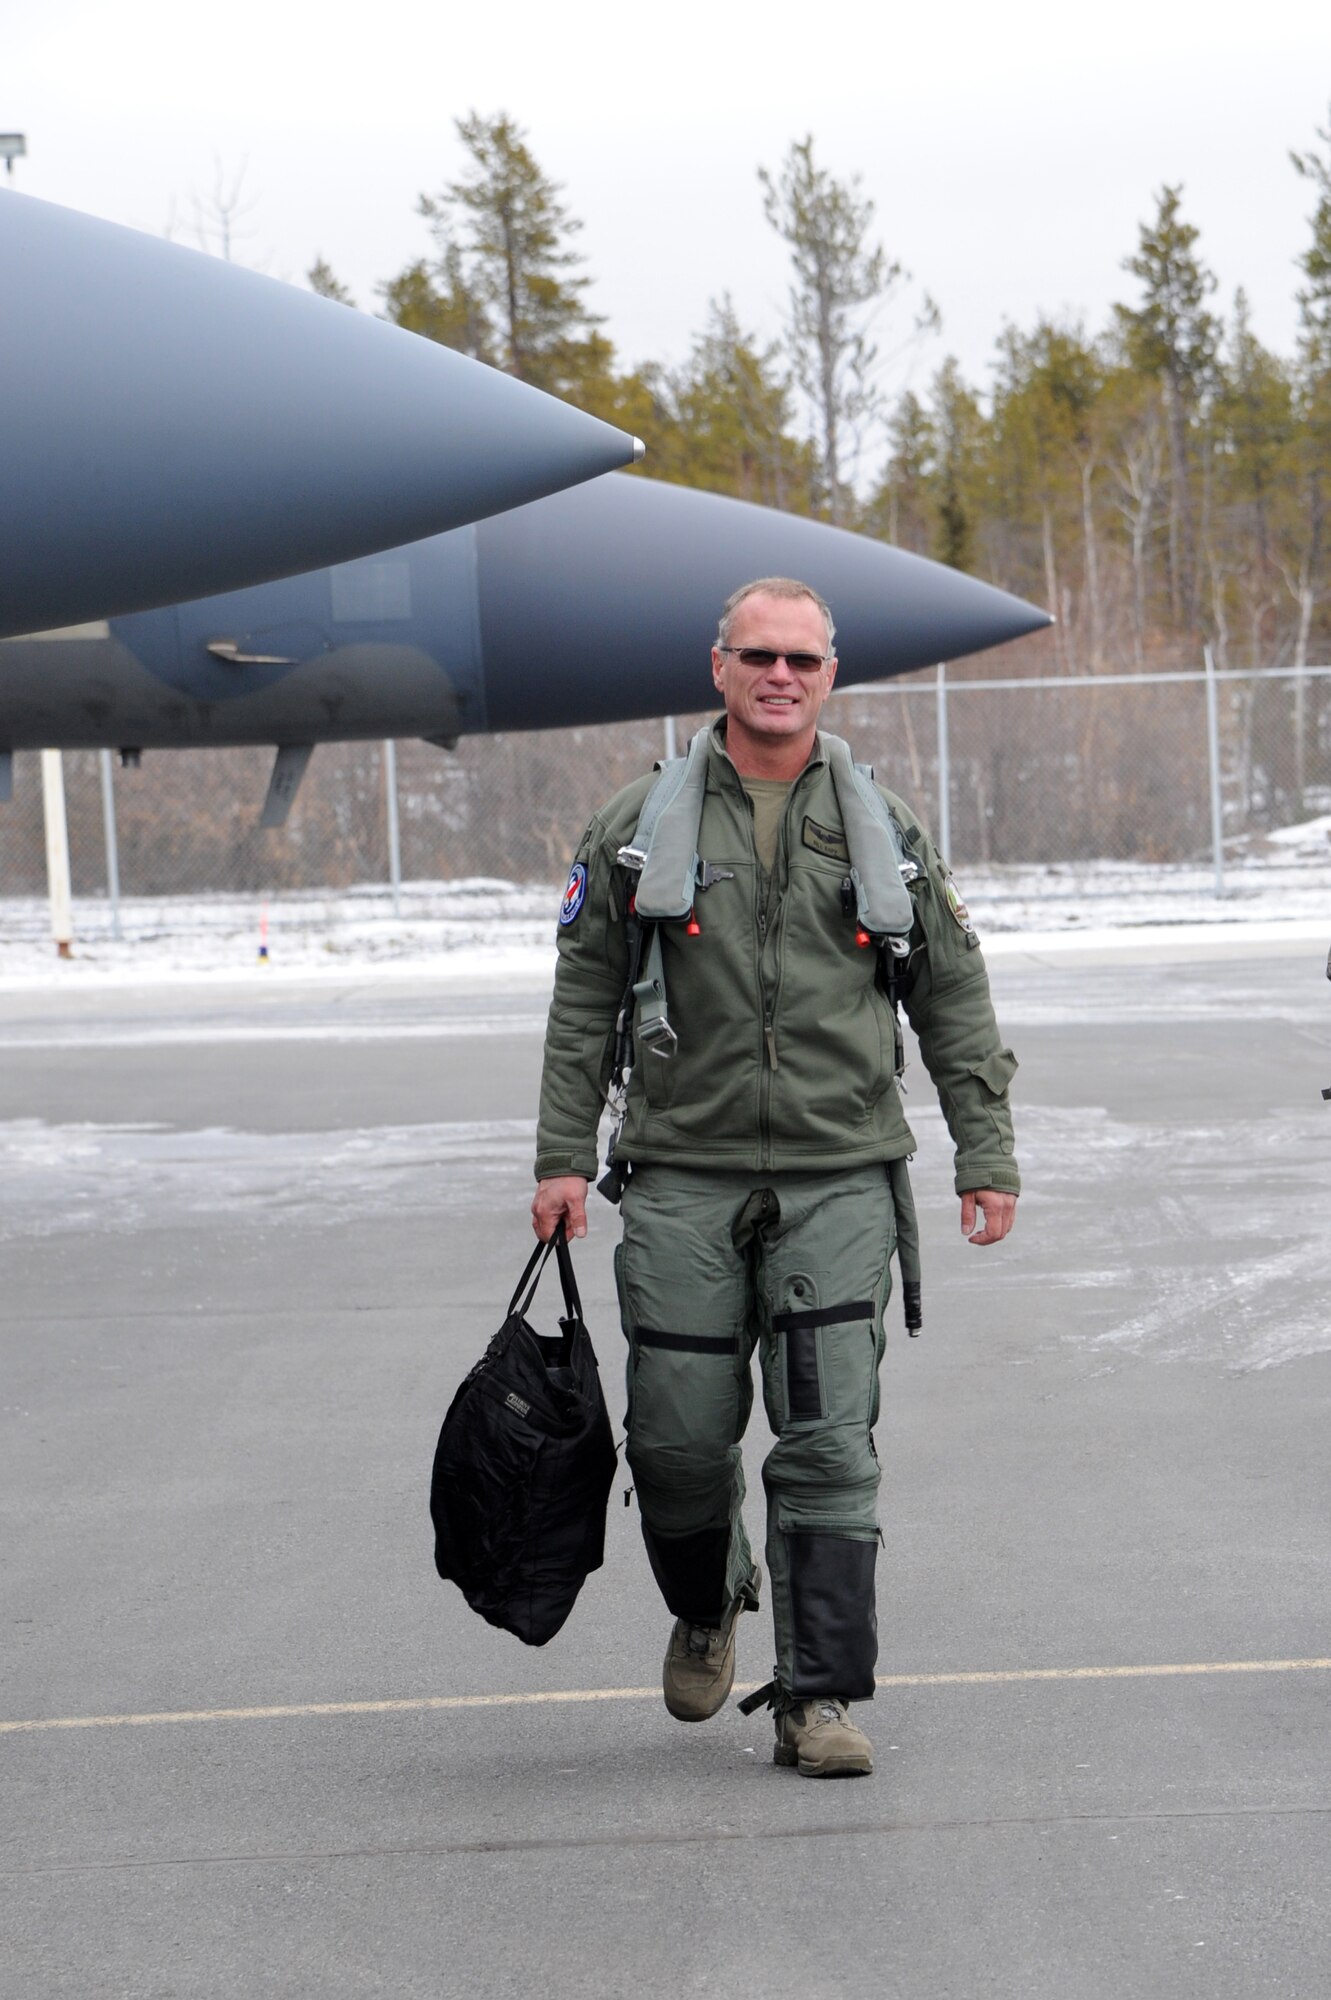 Lt. Col. William Kopp, 123rd Fighter Squadron, arrives in Yellowknife, Northwest Territories, for Exercise Vigilant Shield 2017, Oct. 17, 2016.  During this exercise, forces supporting North American Aerospace Defense Command (NORAD) will deploy and conduct air sovereignty operations in the far north and the high Arctic demonstrating the ability to detect, identify and meet possible threats in some of the most remote regions in the world.  (U.S. Air National Guard photo by Senior Master Sgt. Shelly Davison, 142nd Fighter Wing Public Affairs).  